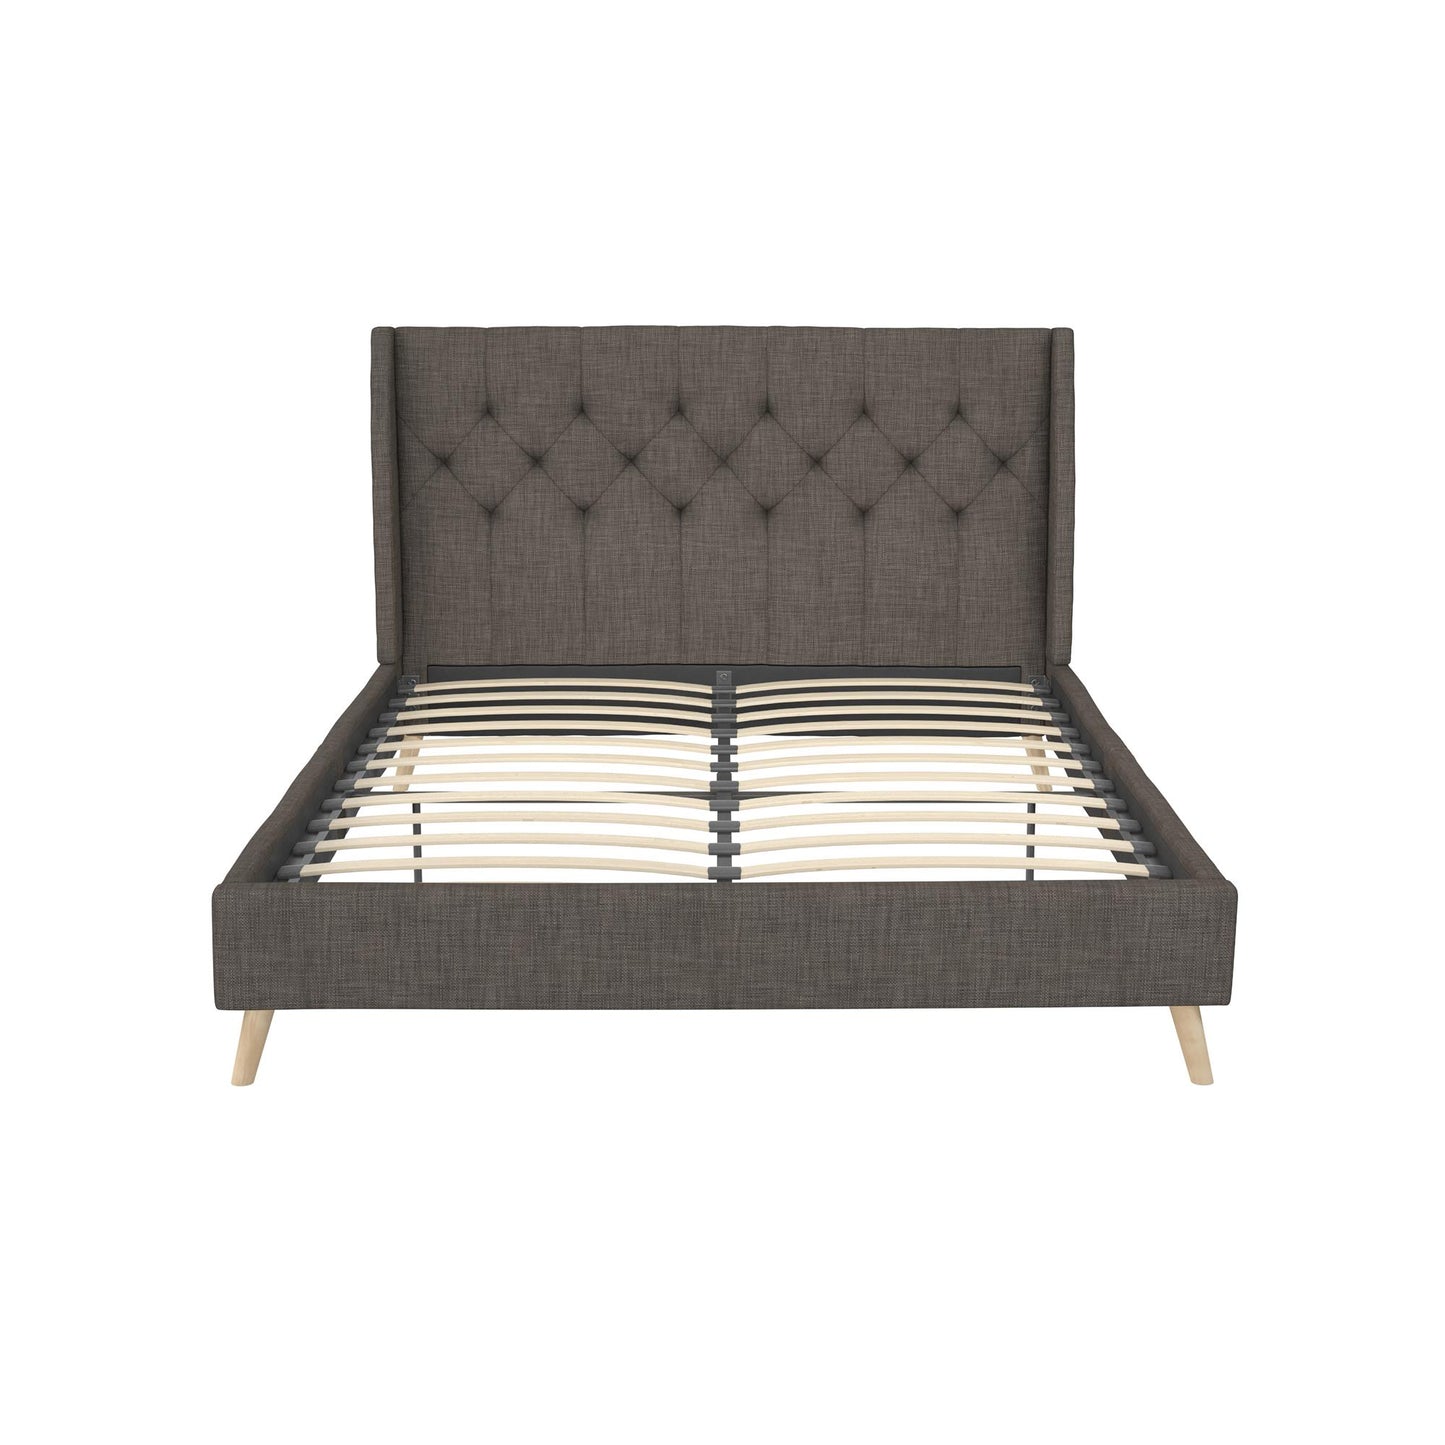 Her Majesty Bed - Grey Linen - Full